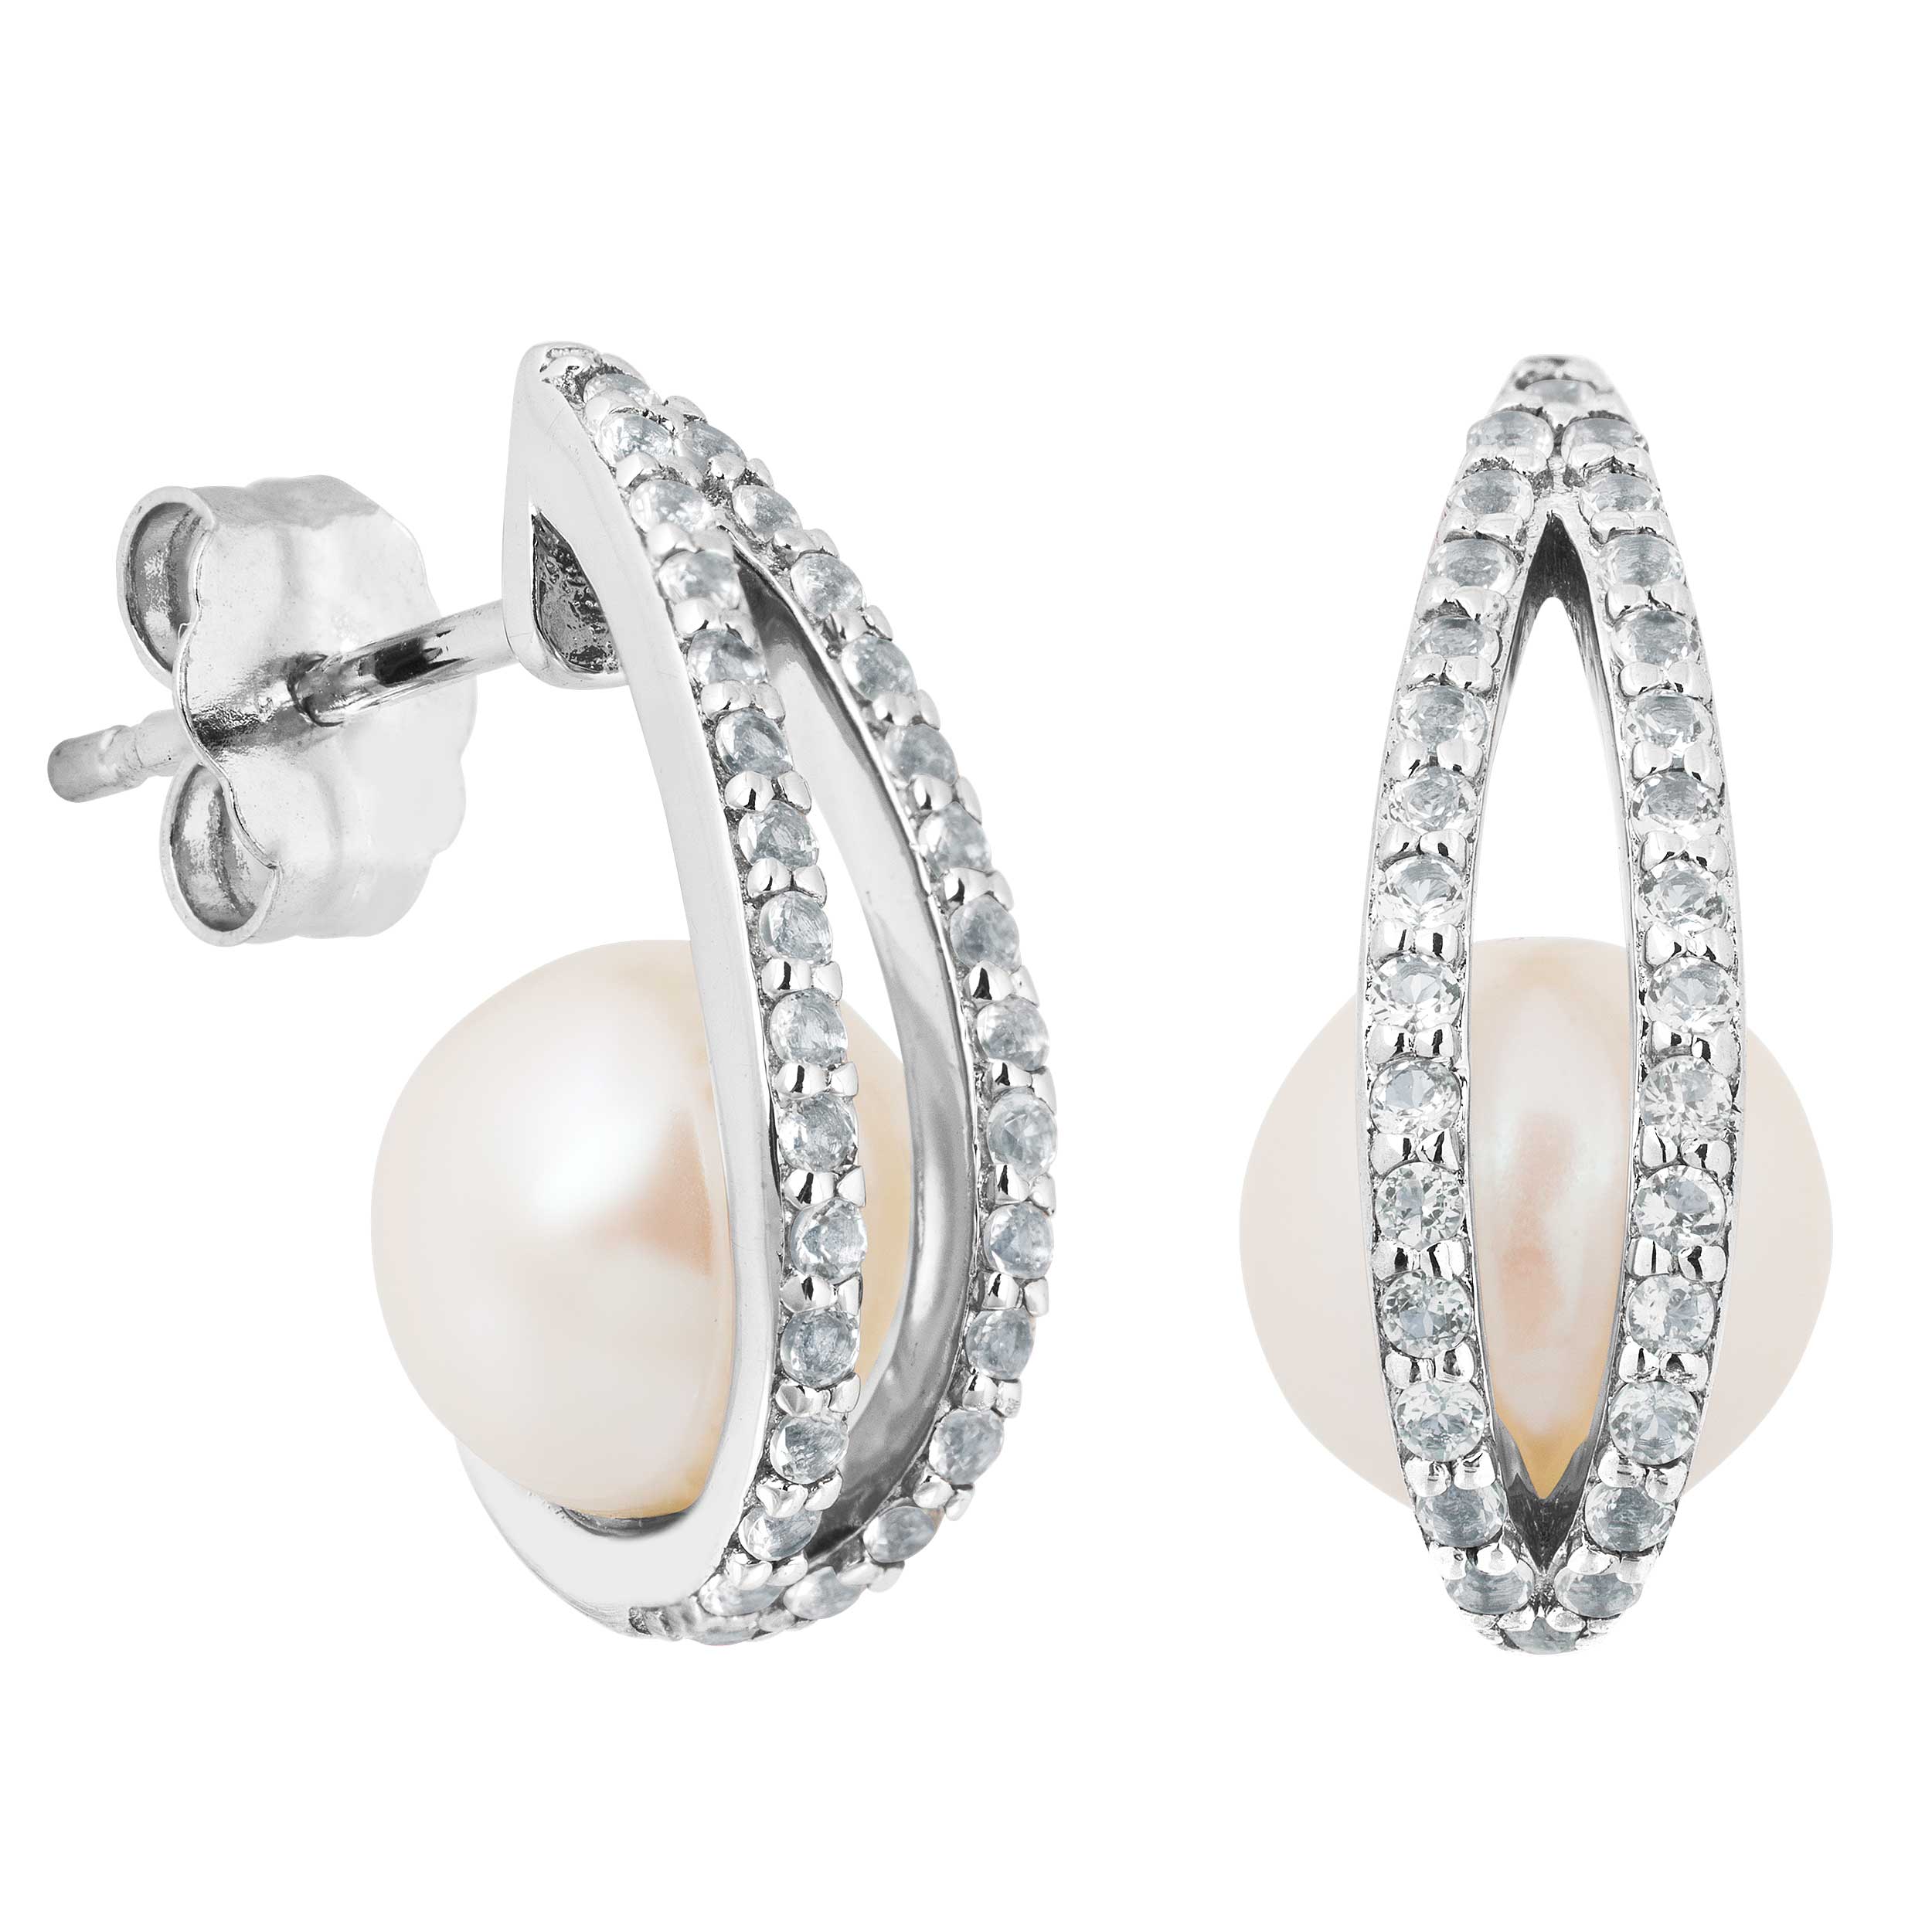 Round White Pearl Earrings, Rhodium Plated Sterling Silver